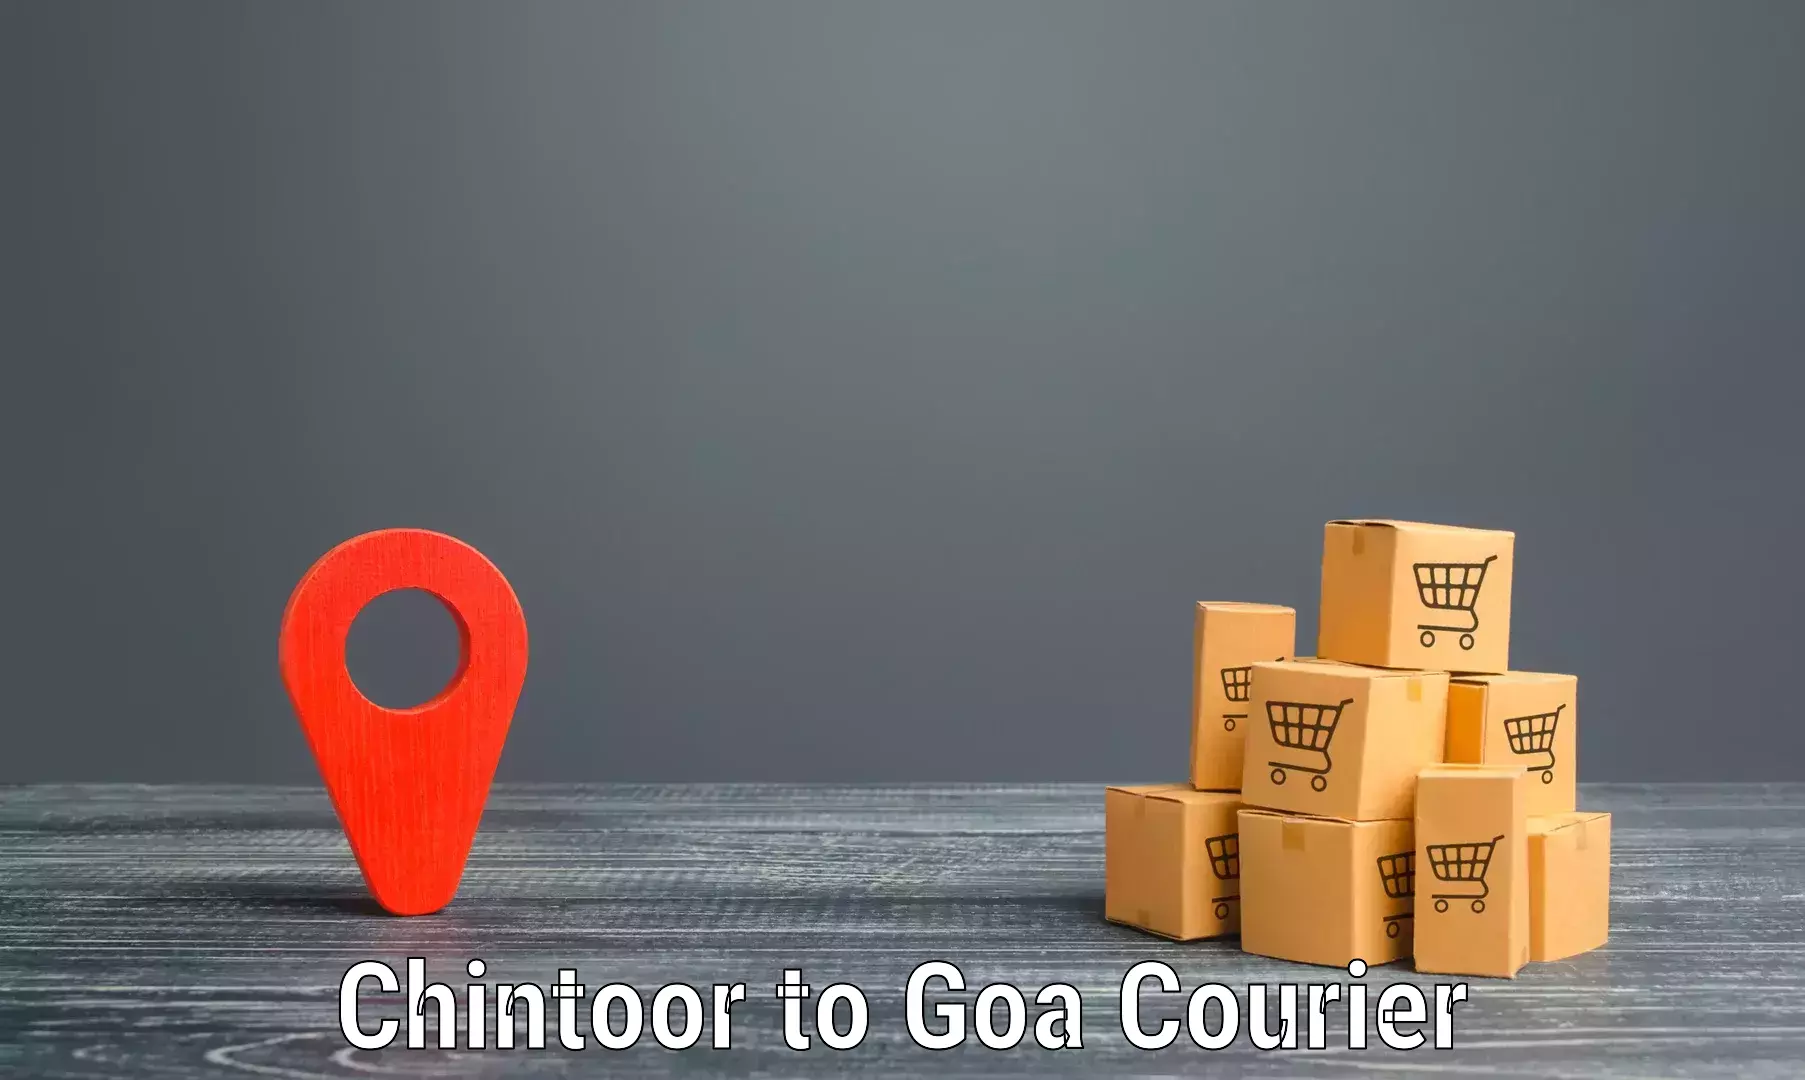 Express delivery network Chintoor to Goa